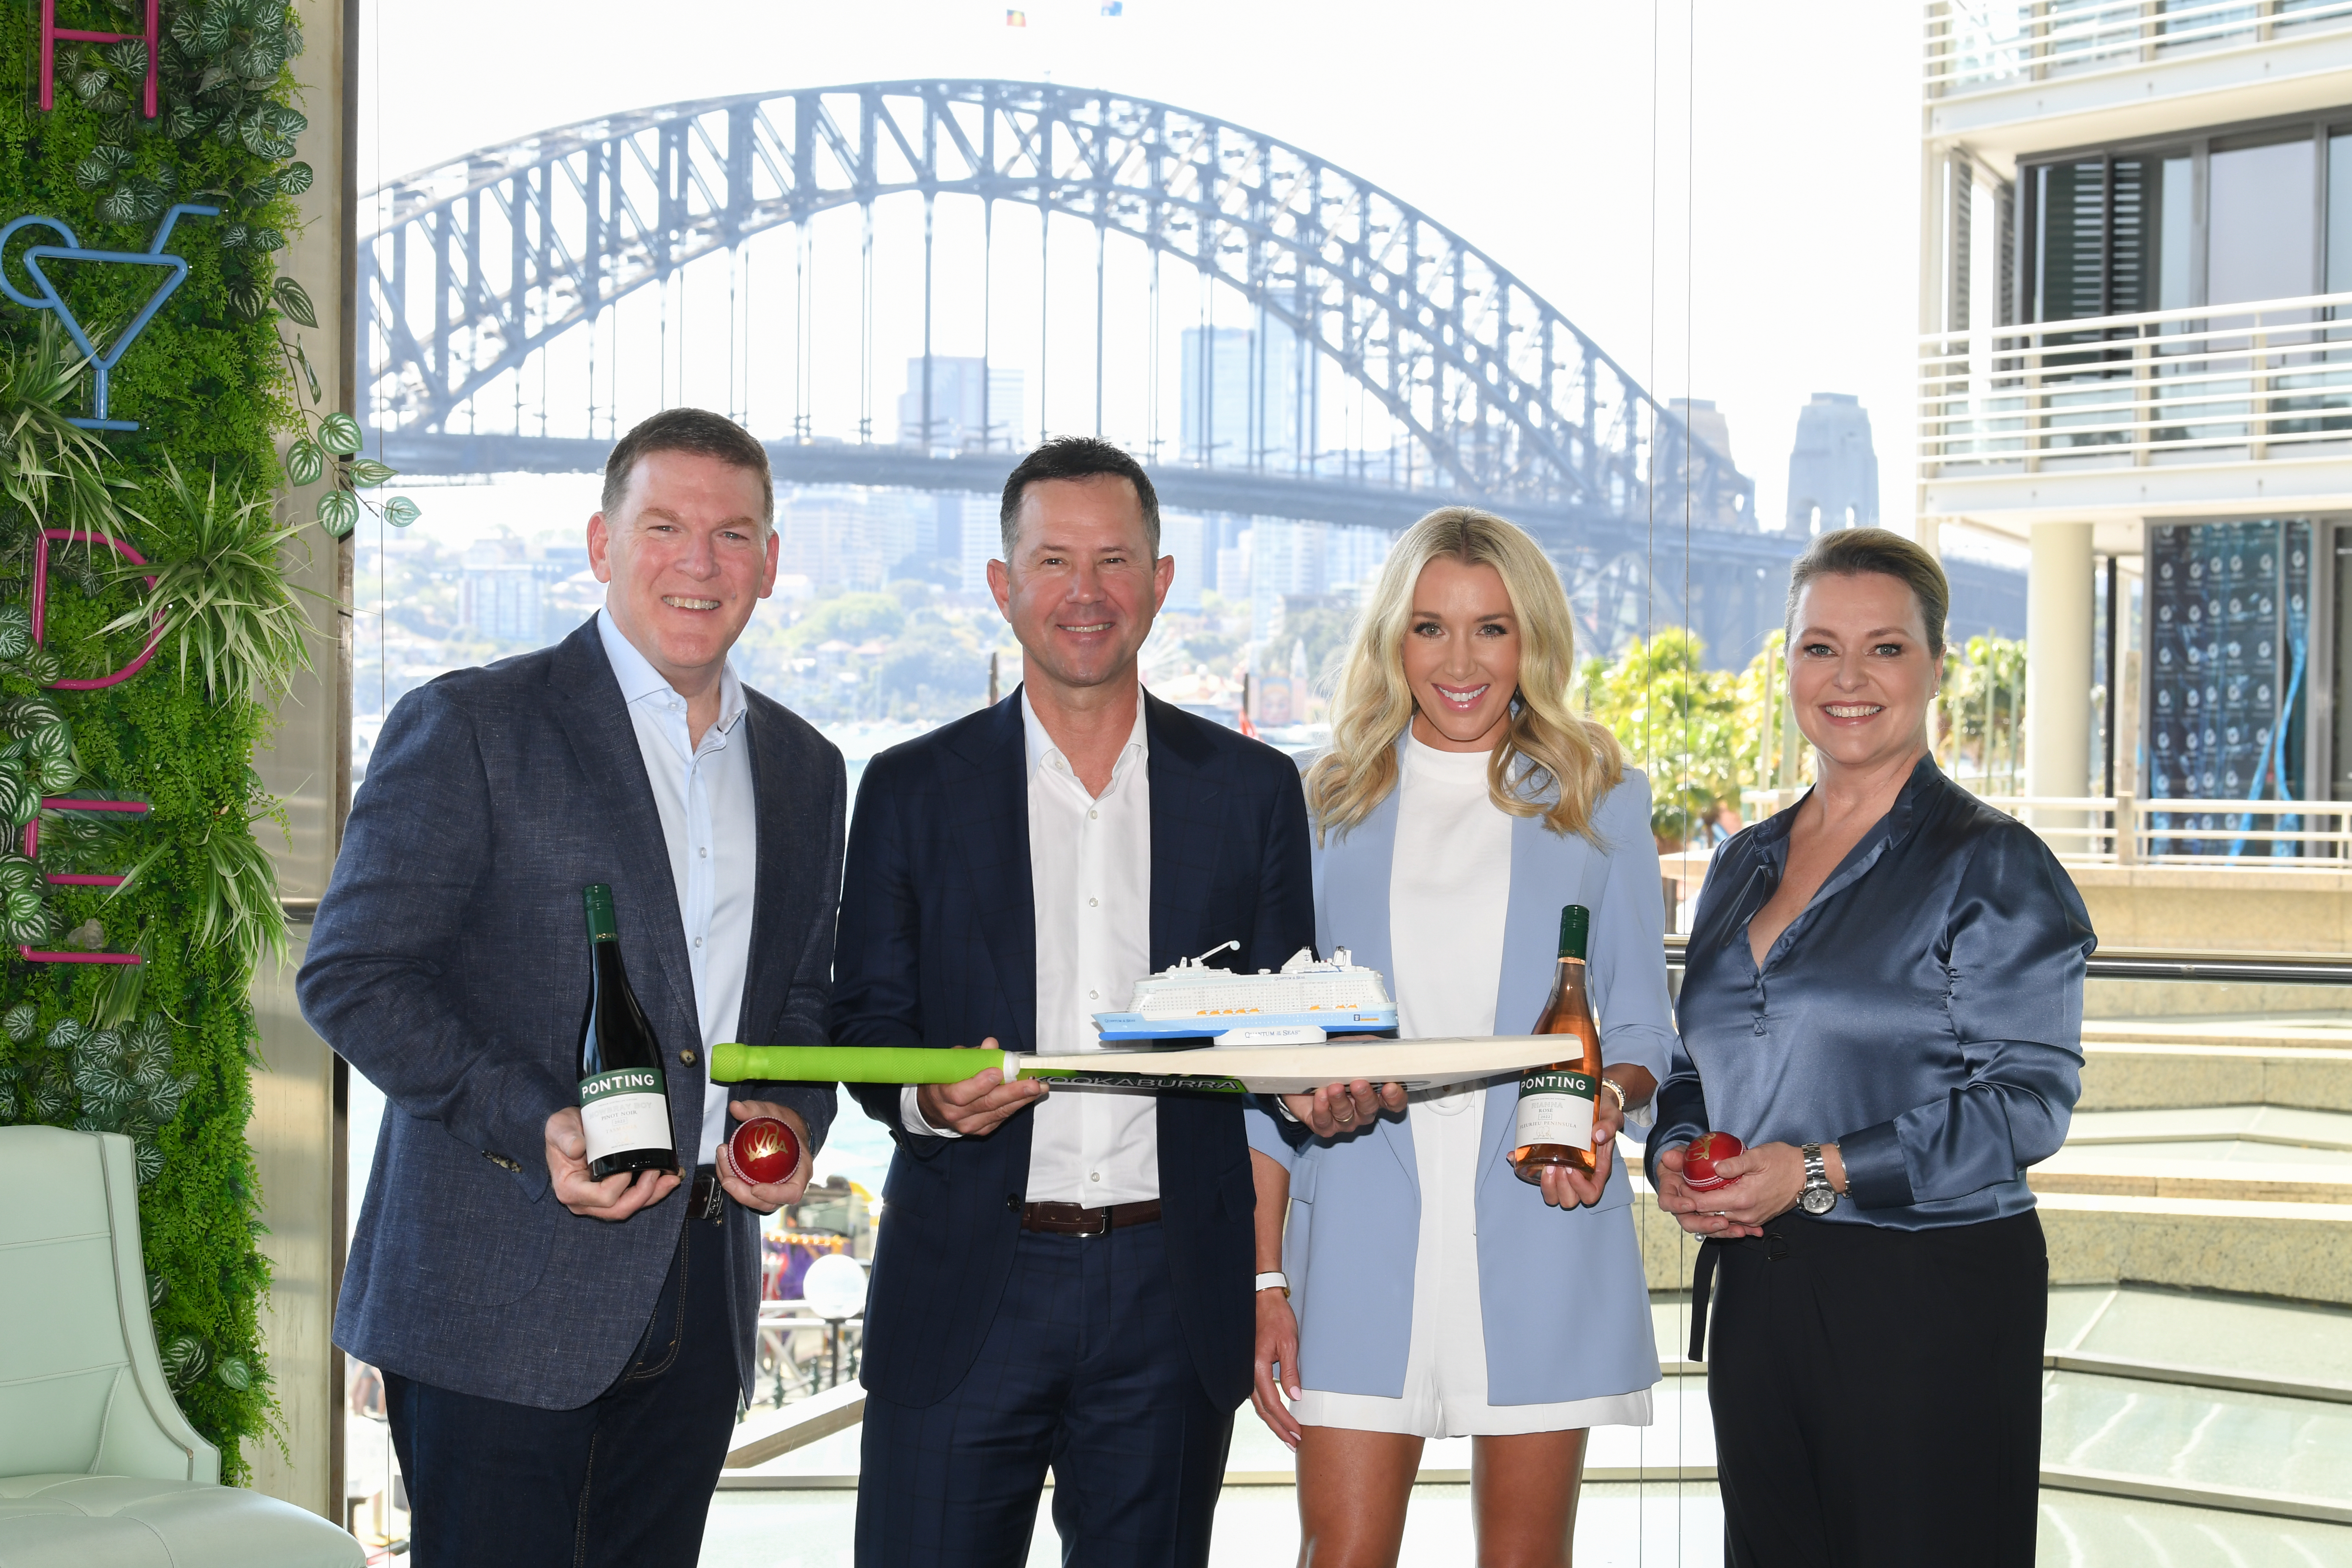 September 2023 – Gavin Smith, vice president and managing director in Australia and New Zealand for Royal Caribbean International; celebrated cricketer Ricky Ponting, Rianna Ponting; and Kathryn Lock, director of marketing in Australia and New Zealand for Royal Caribbean International, celebrate the launch of the cruise line’s new, exclusive partnership with the award-winning Ponting Wines (Image at LateCruiseNews.com - October 2023)